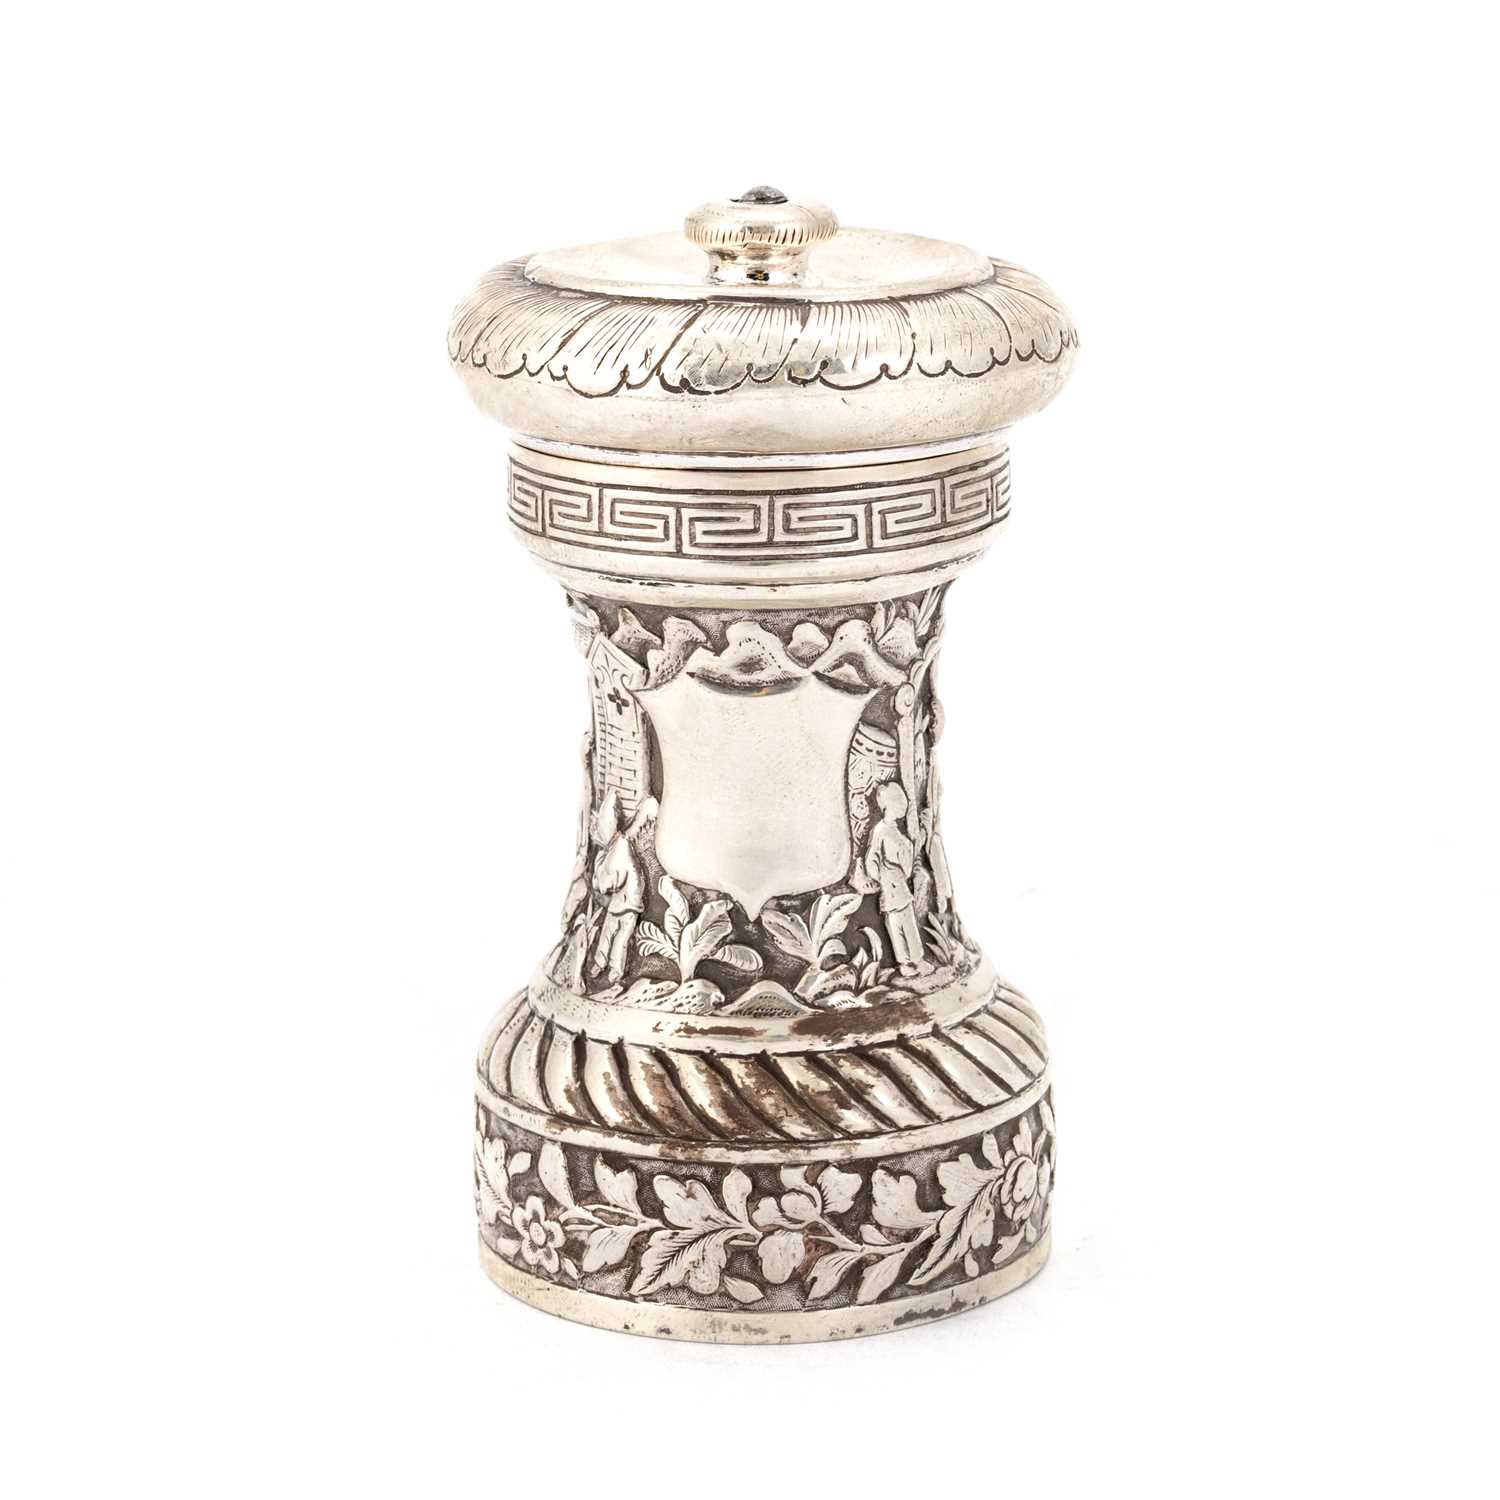 A RARE CHINESE CAST SILVER PEPPER GRINDER - Image 2 of 4